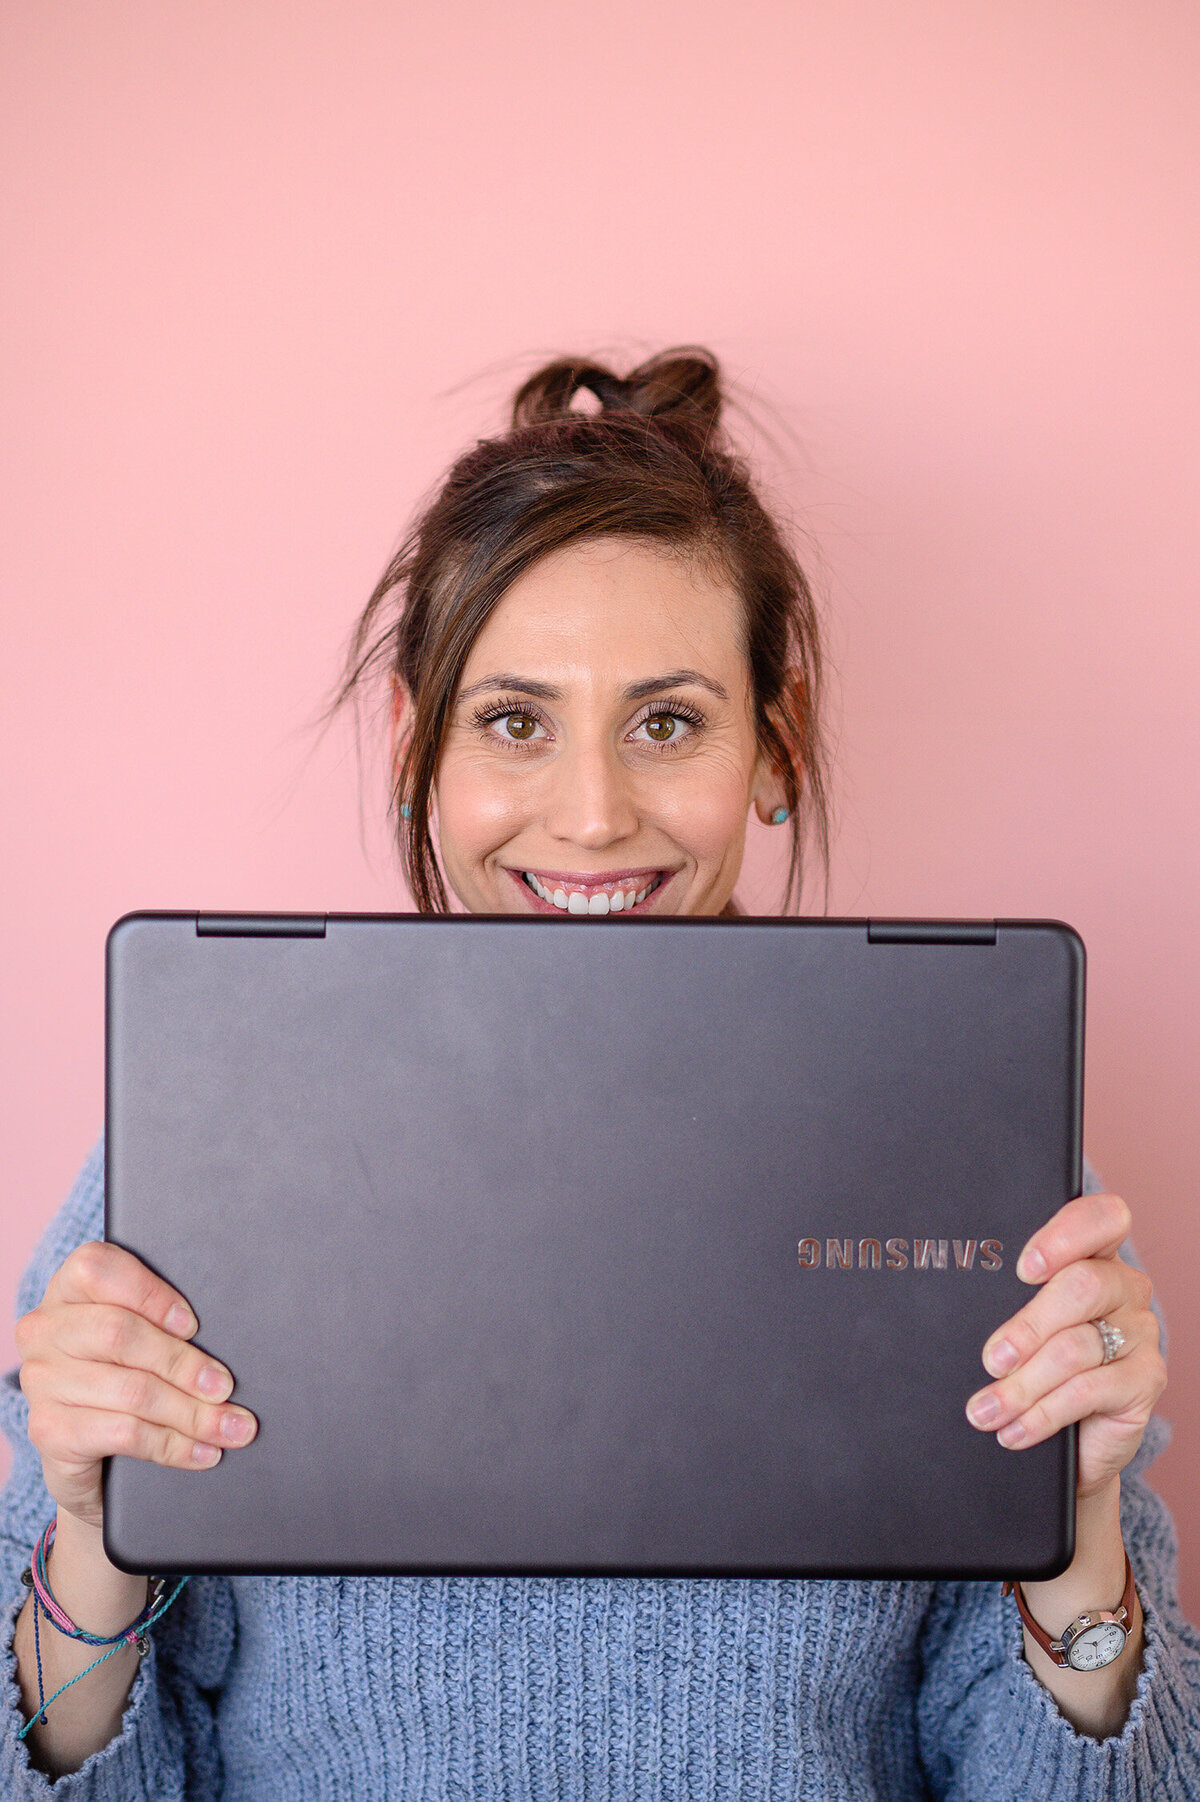 denver commercial photographers pose woman business owner holding her computer in front of her face for branding photos